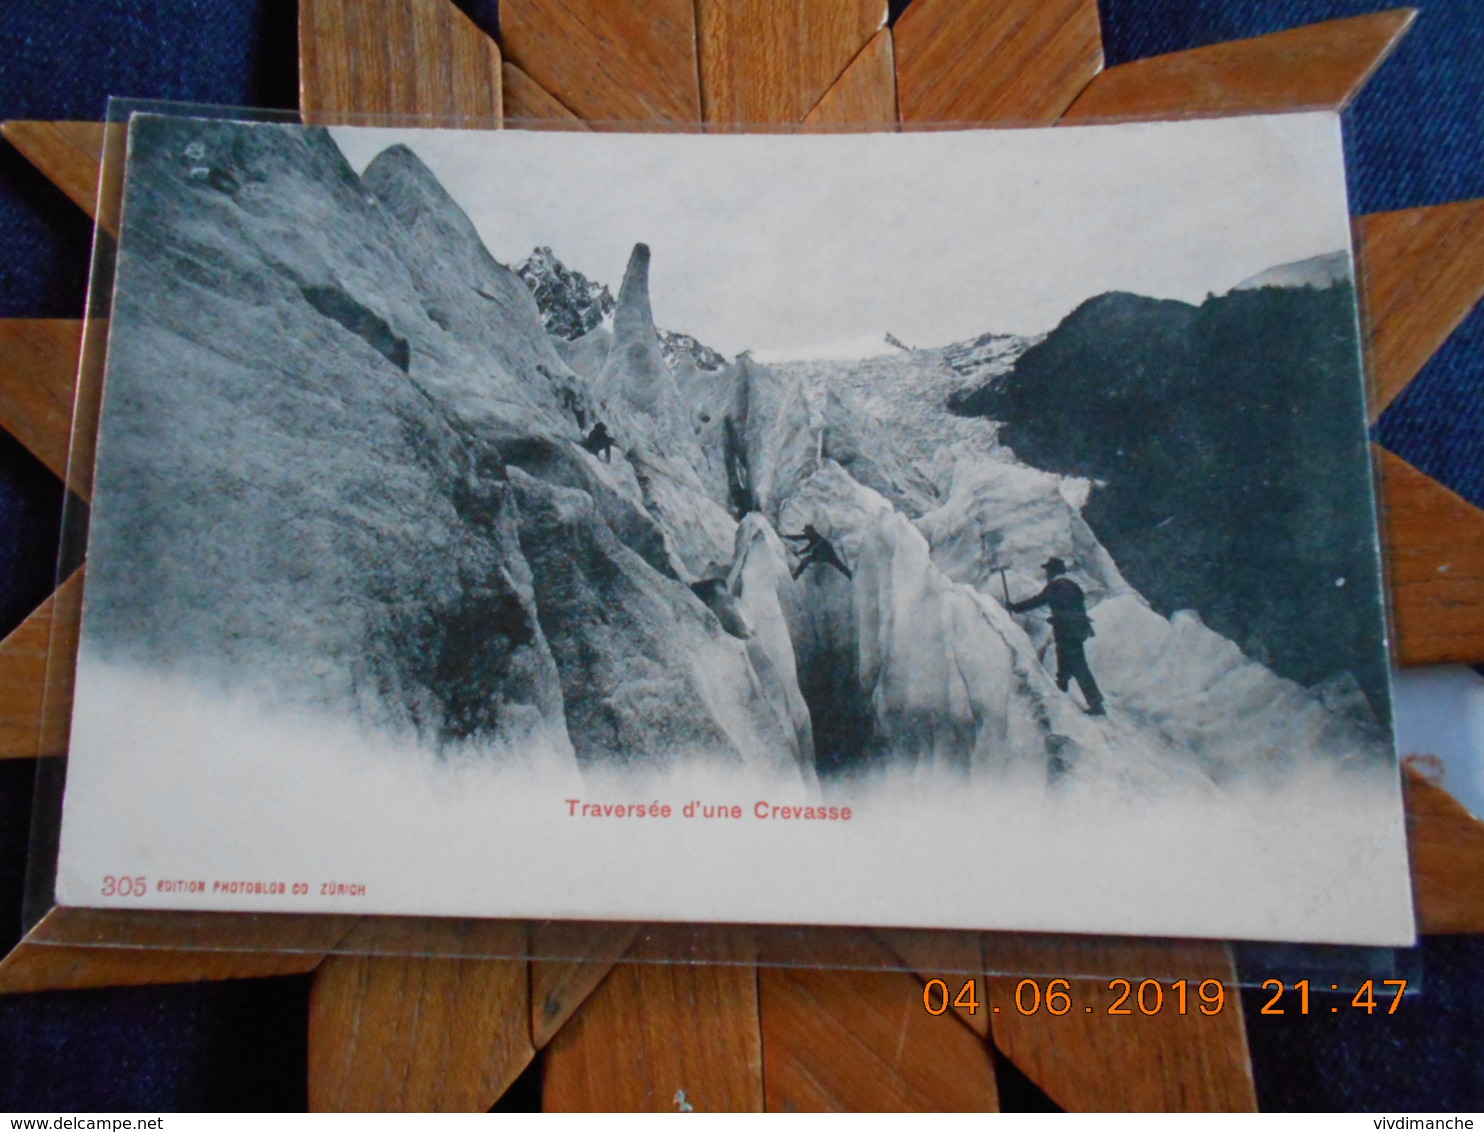 SUISSE - TRAVERSEE D'UNE CREVASSE DEBUT XXEME SIECLE - CPA DOS NON DIVISE - VIERGE - Avers